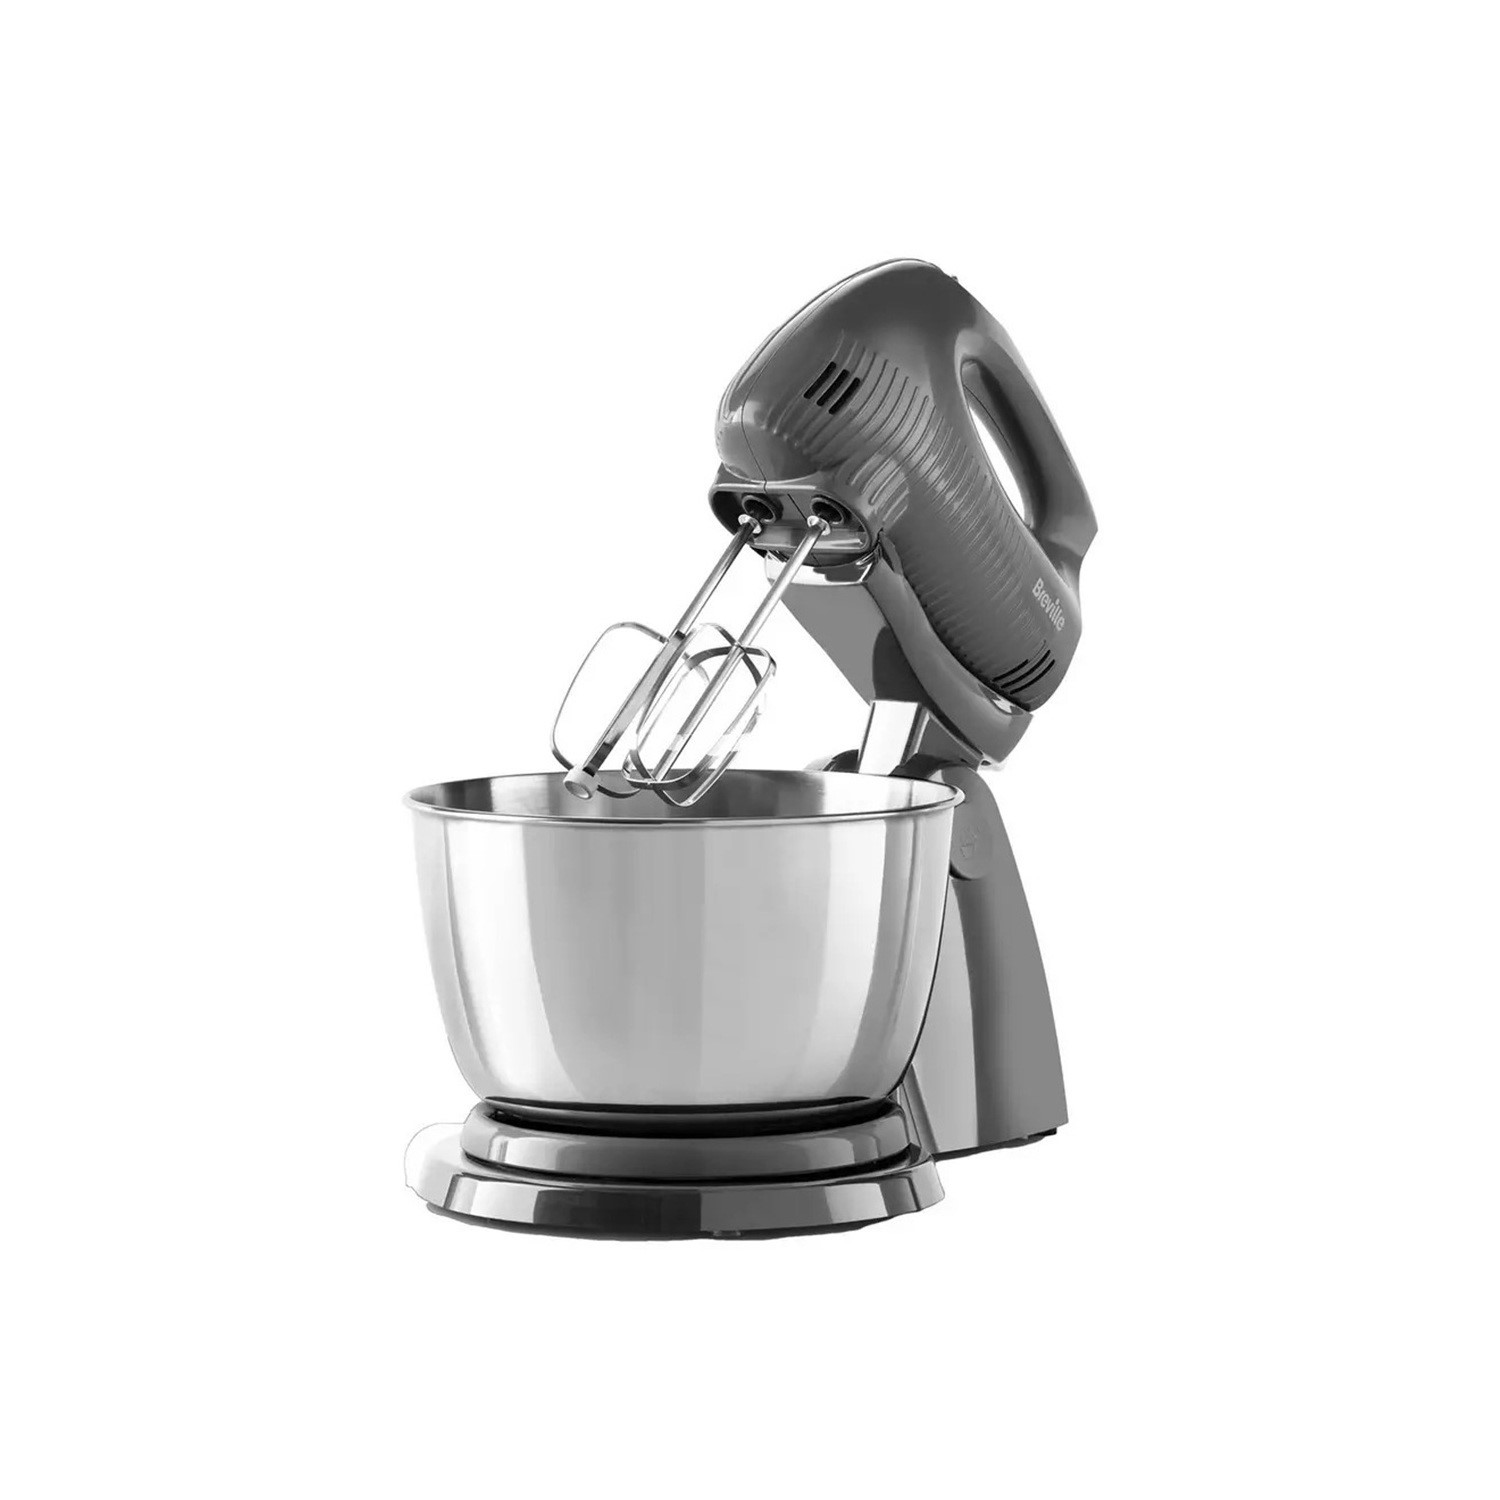 Breville Flow Stand Mixer with Detachable Hand Mixer and 3.5L Bowl in Grey